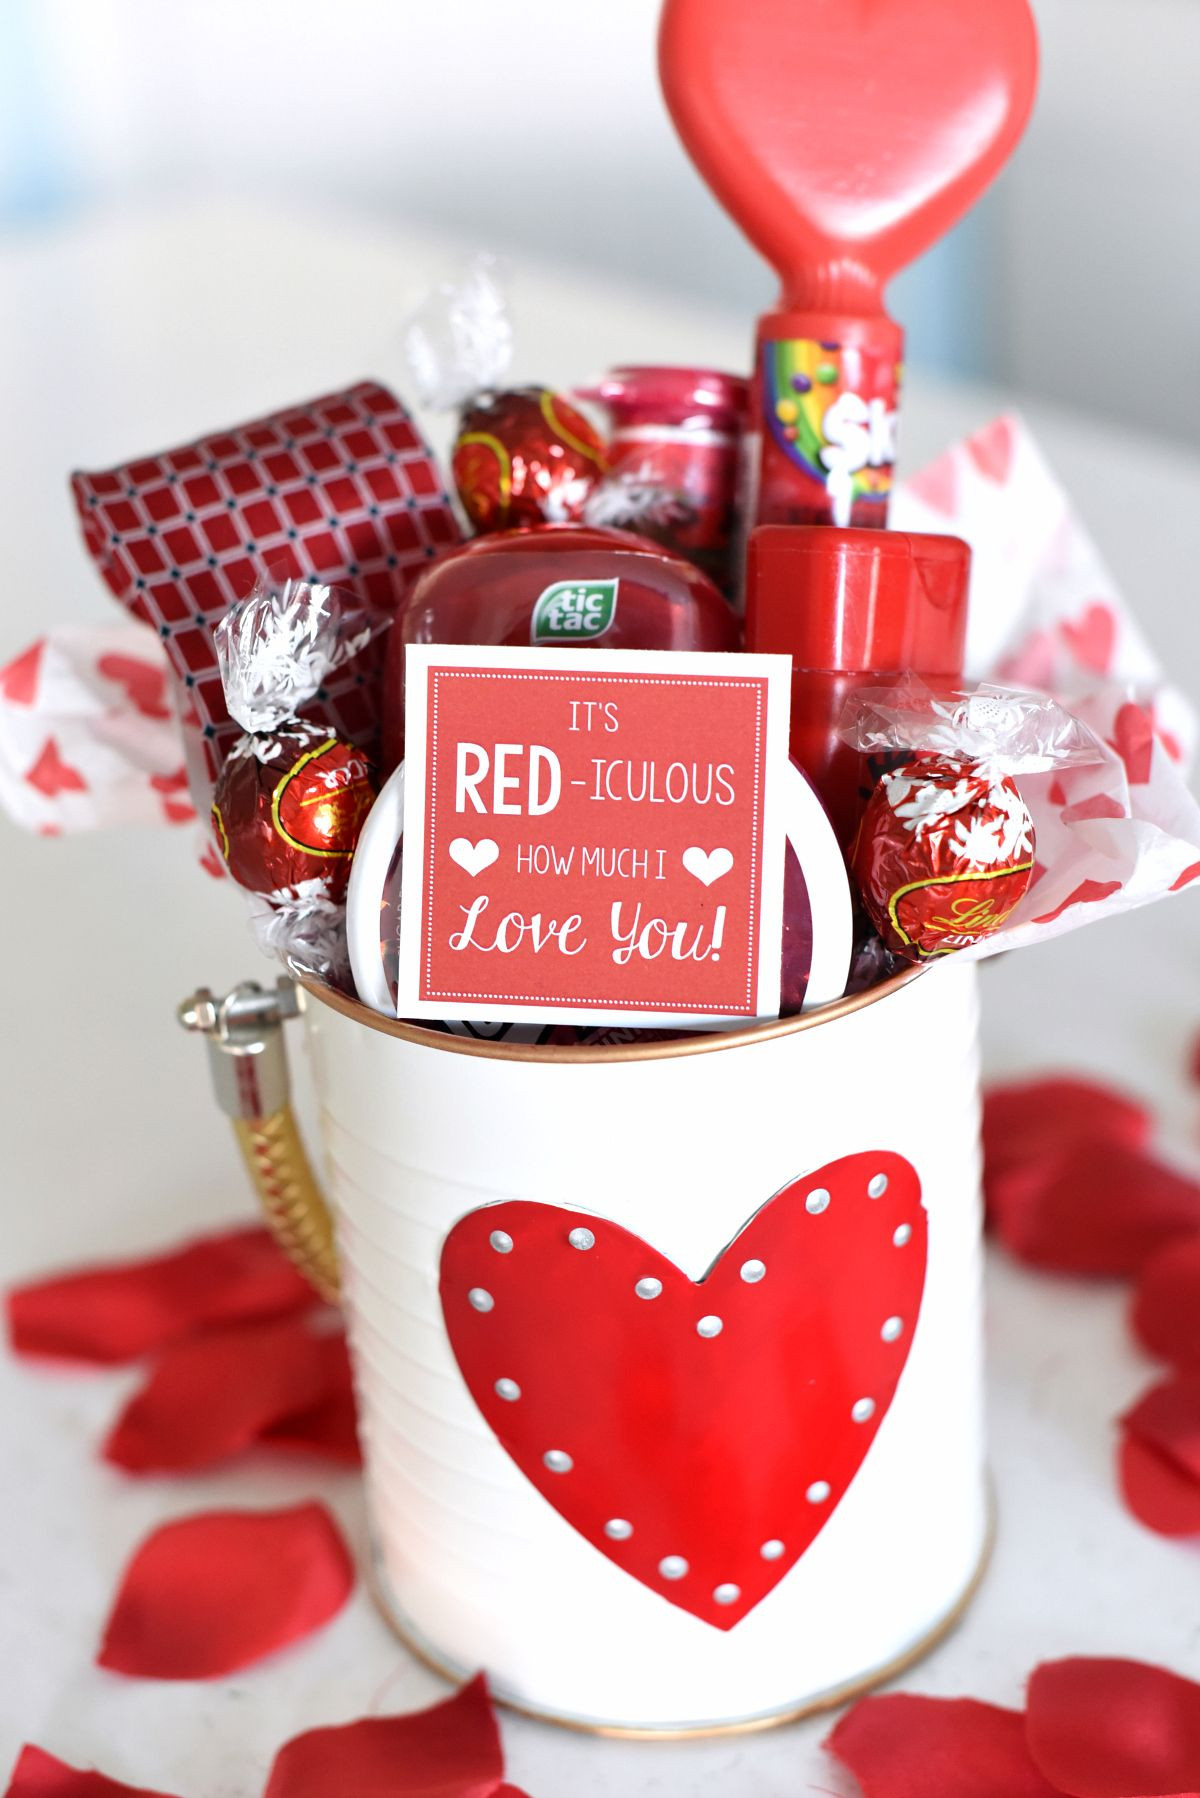 Best Valentines Gift Ideas
 Cute Valentine s Day Gift Idea RED iculous Basket